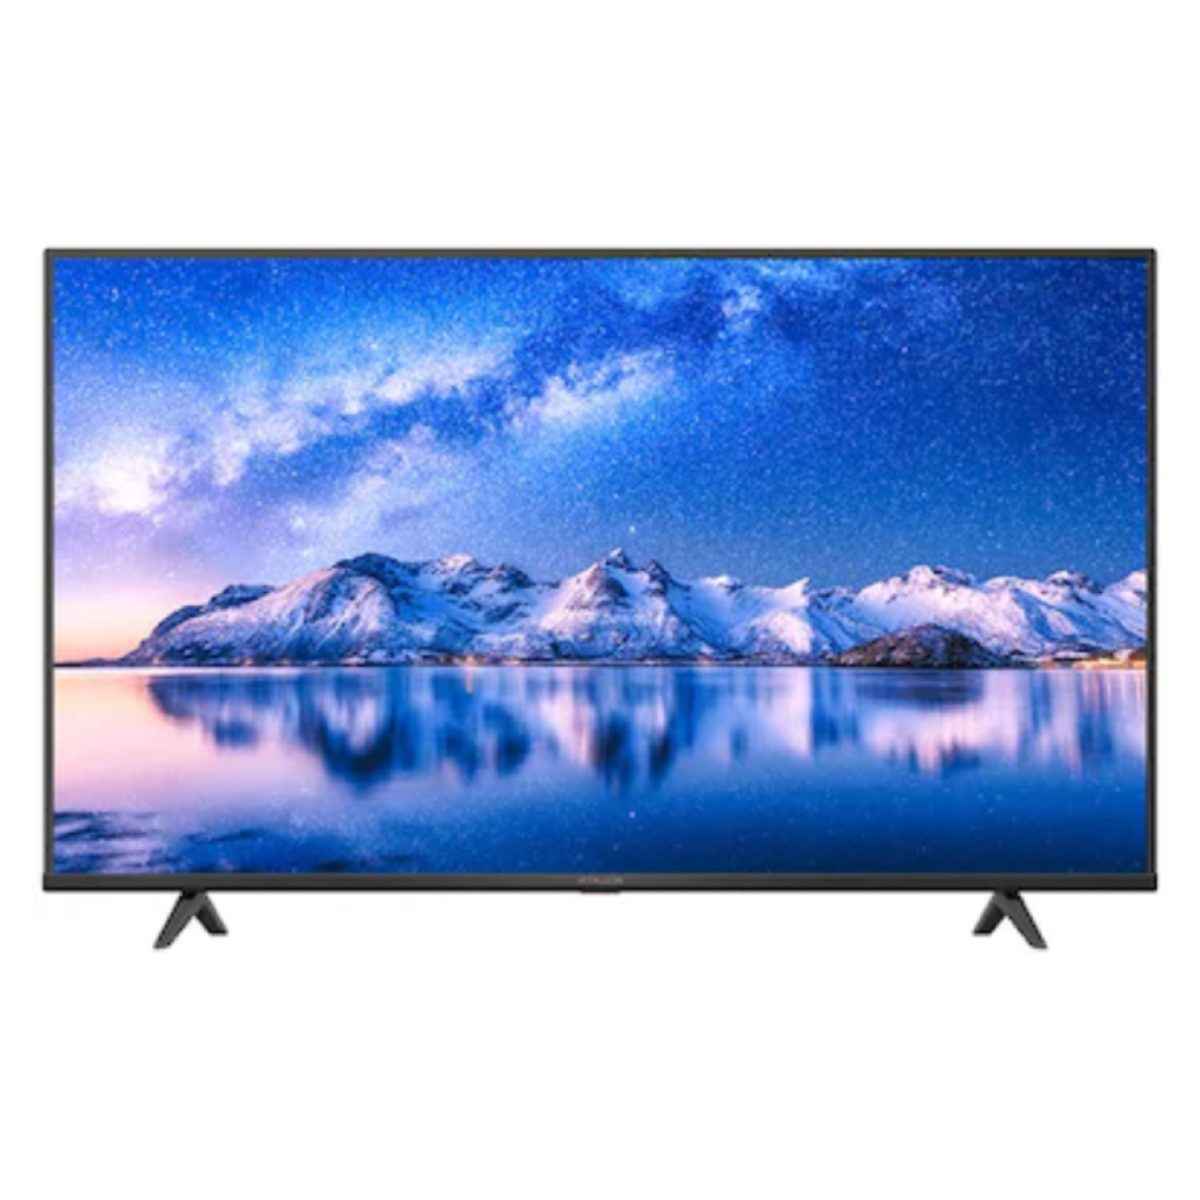 iFFALCON 43 inch 4K LED Smart Android TV (43K61)